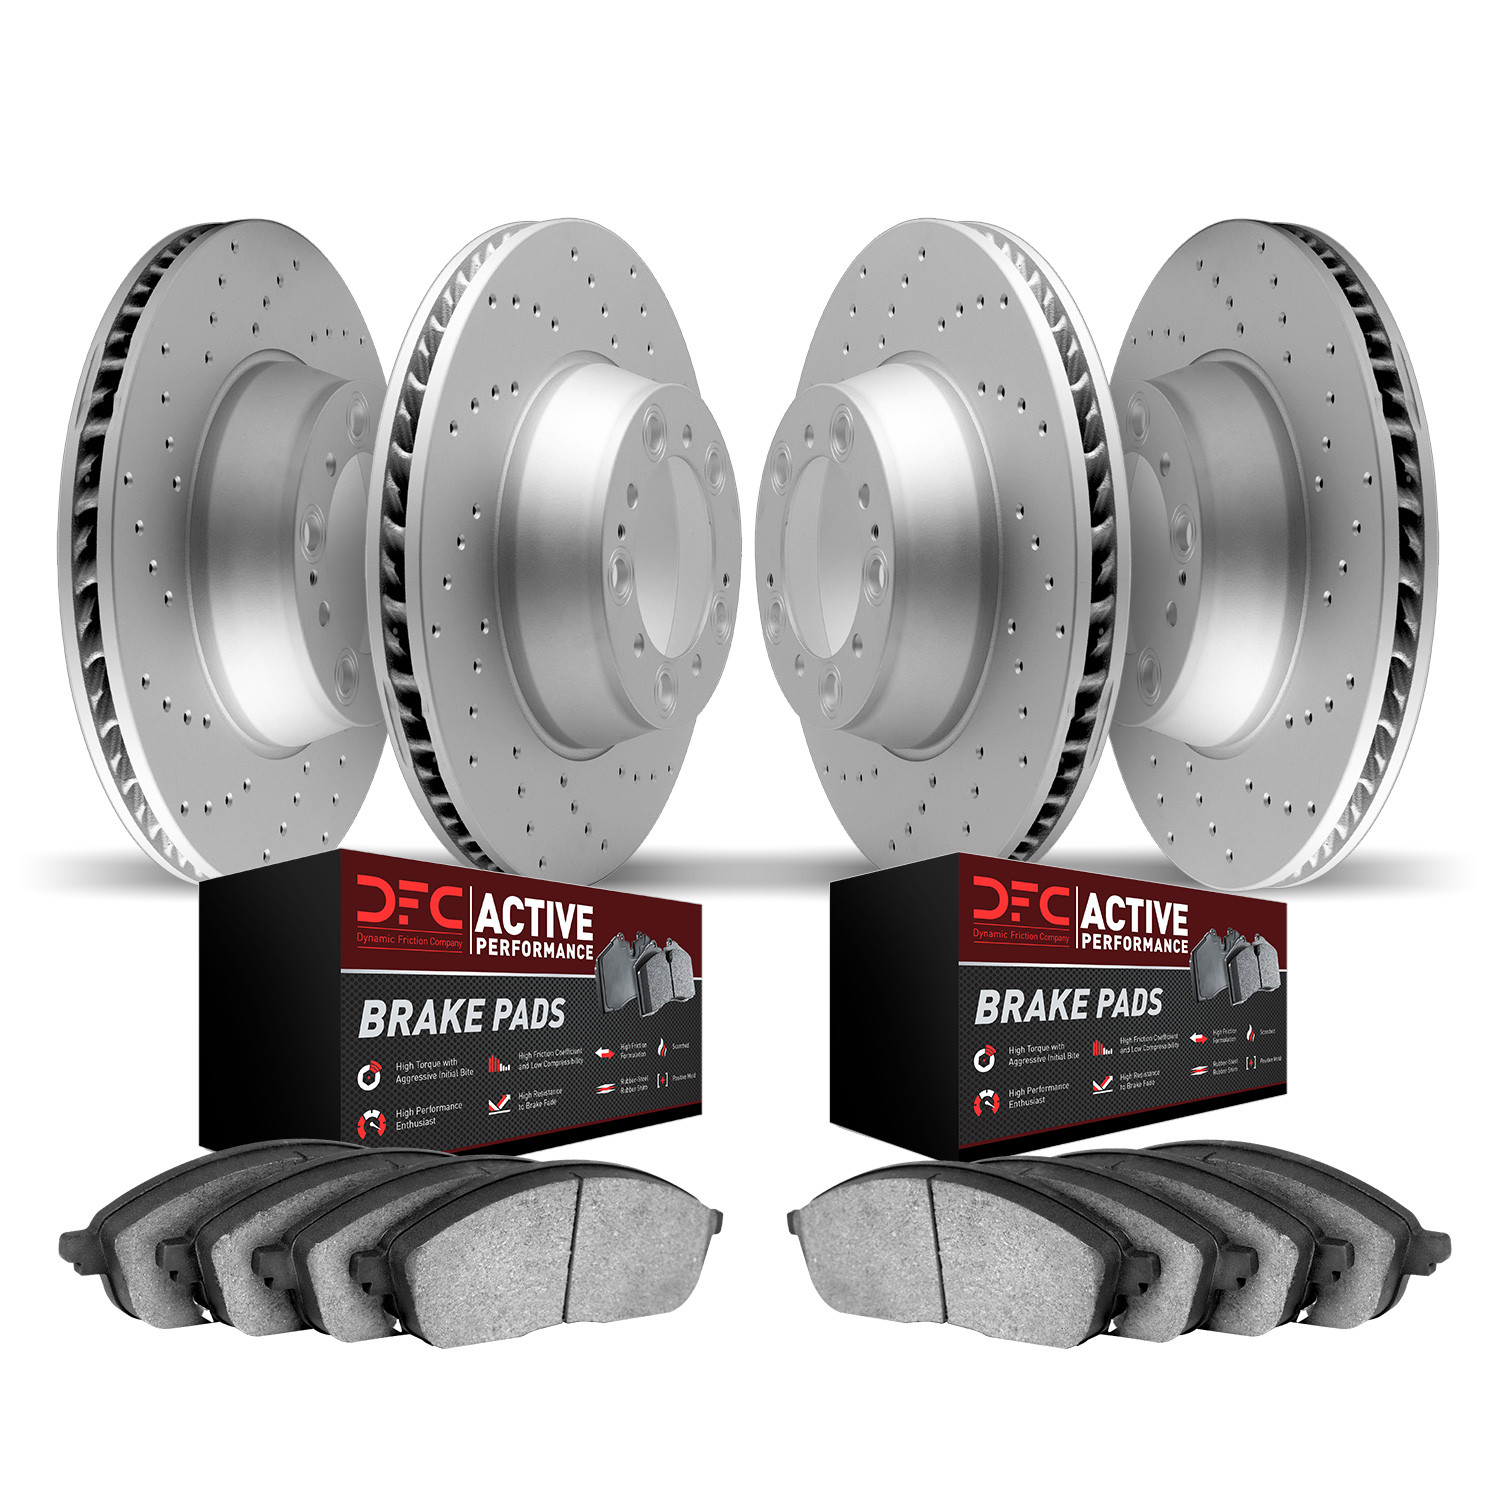 2704-67030 Geoperformance Drilled Brake Rotors with Active Performance Pads Kit, 2005-2020 Infiniti/Nissan, Position: Front and